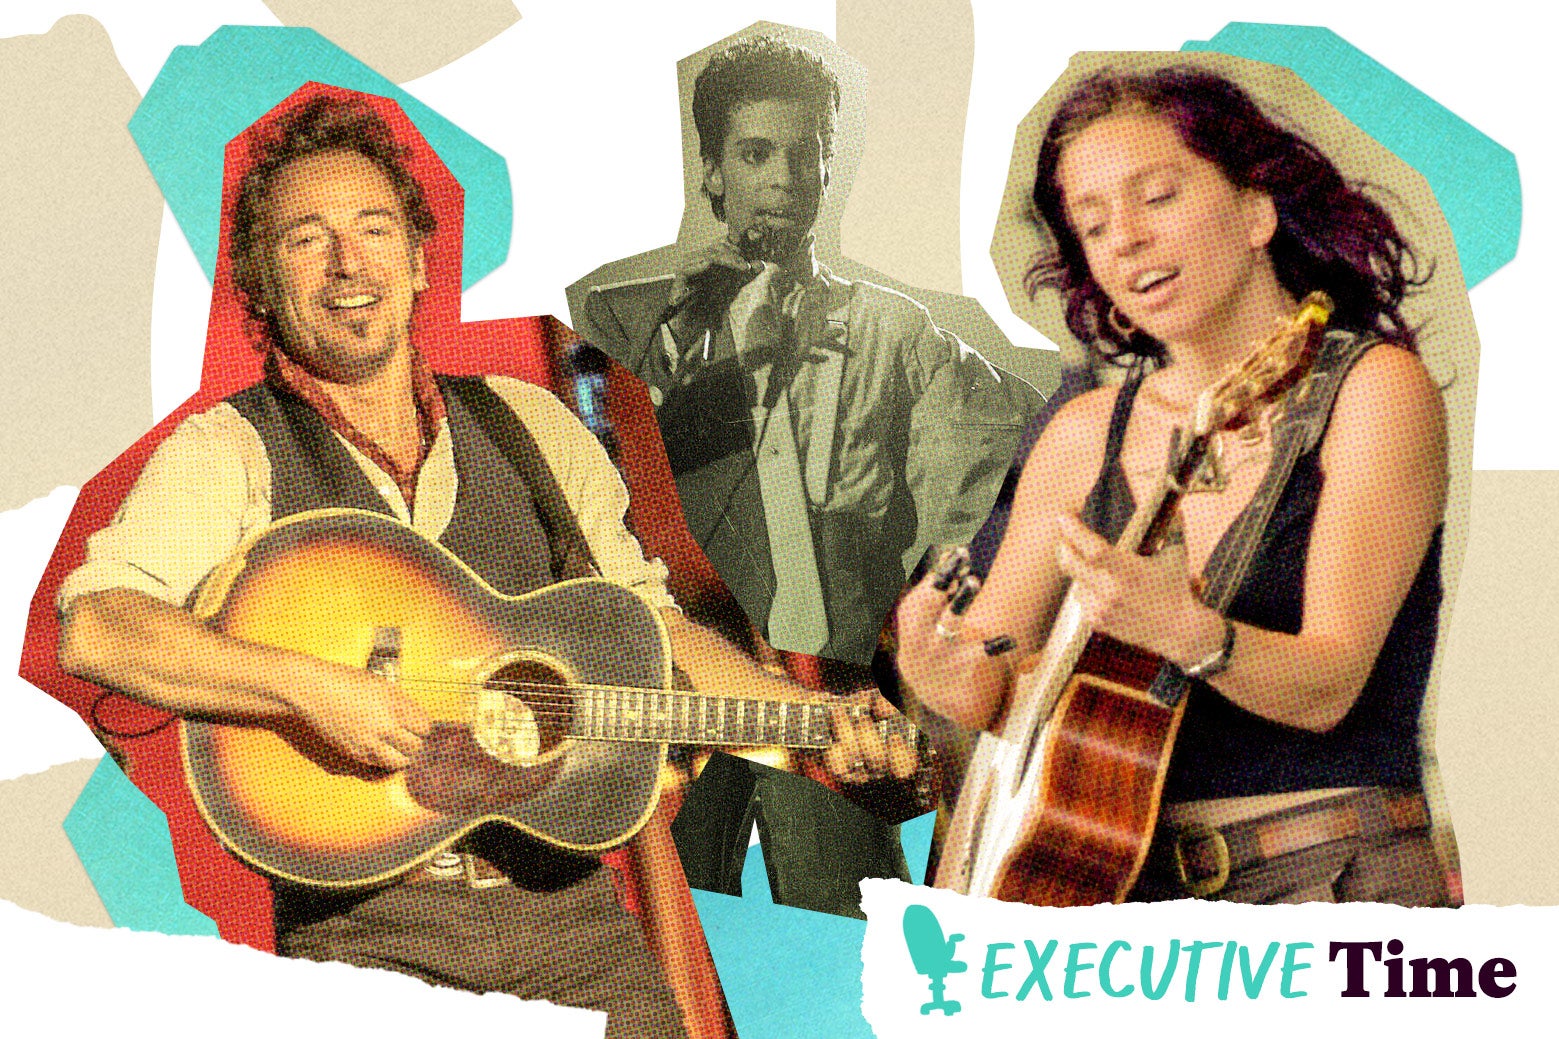 Bruce Springsteen, Prince, and Ani DiFranco.